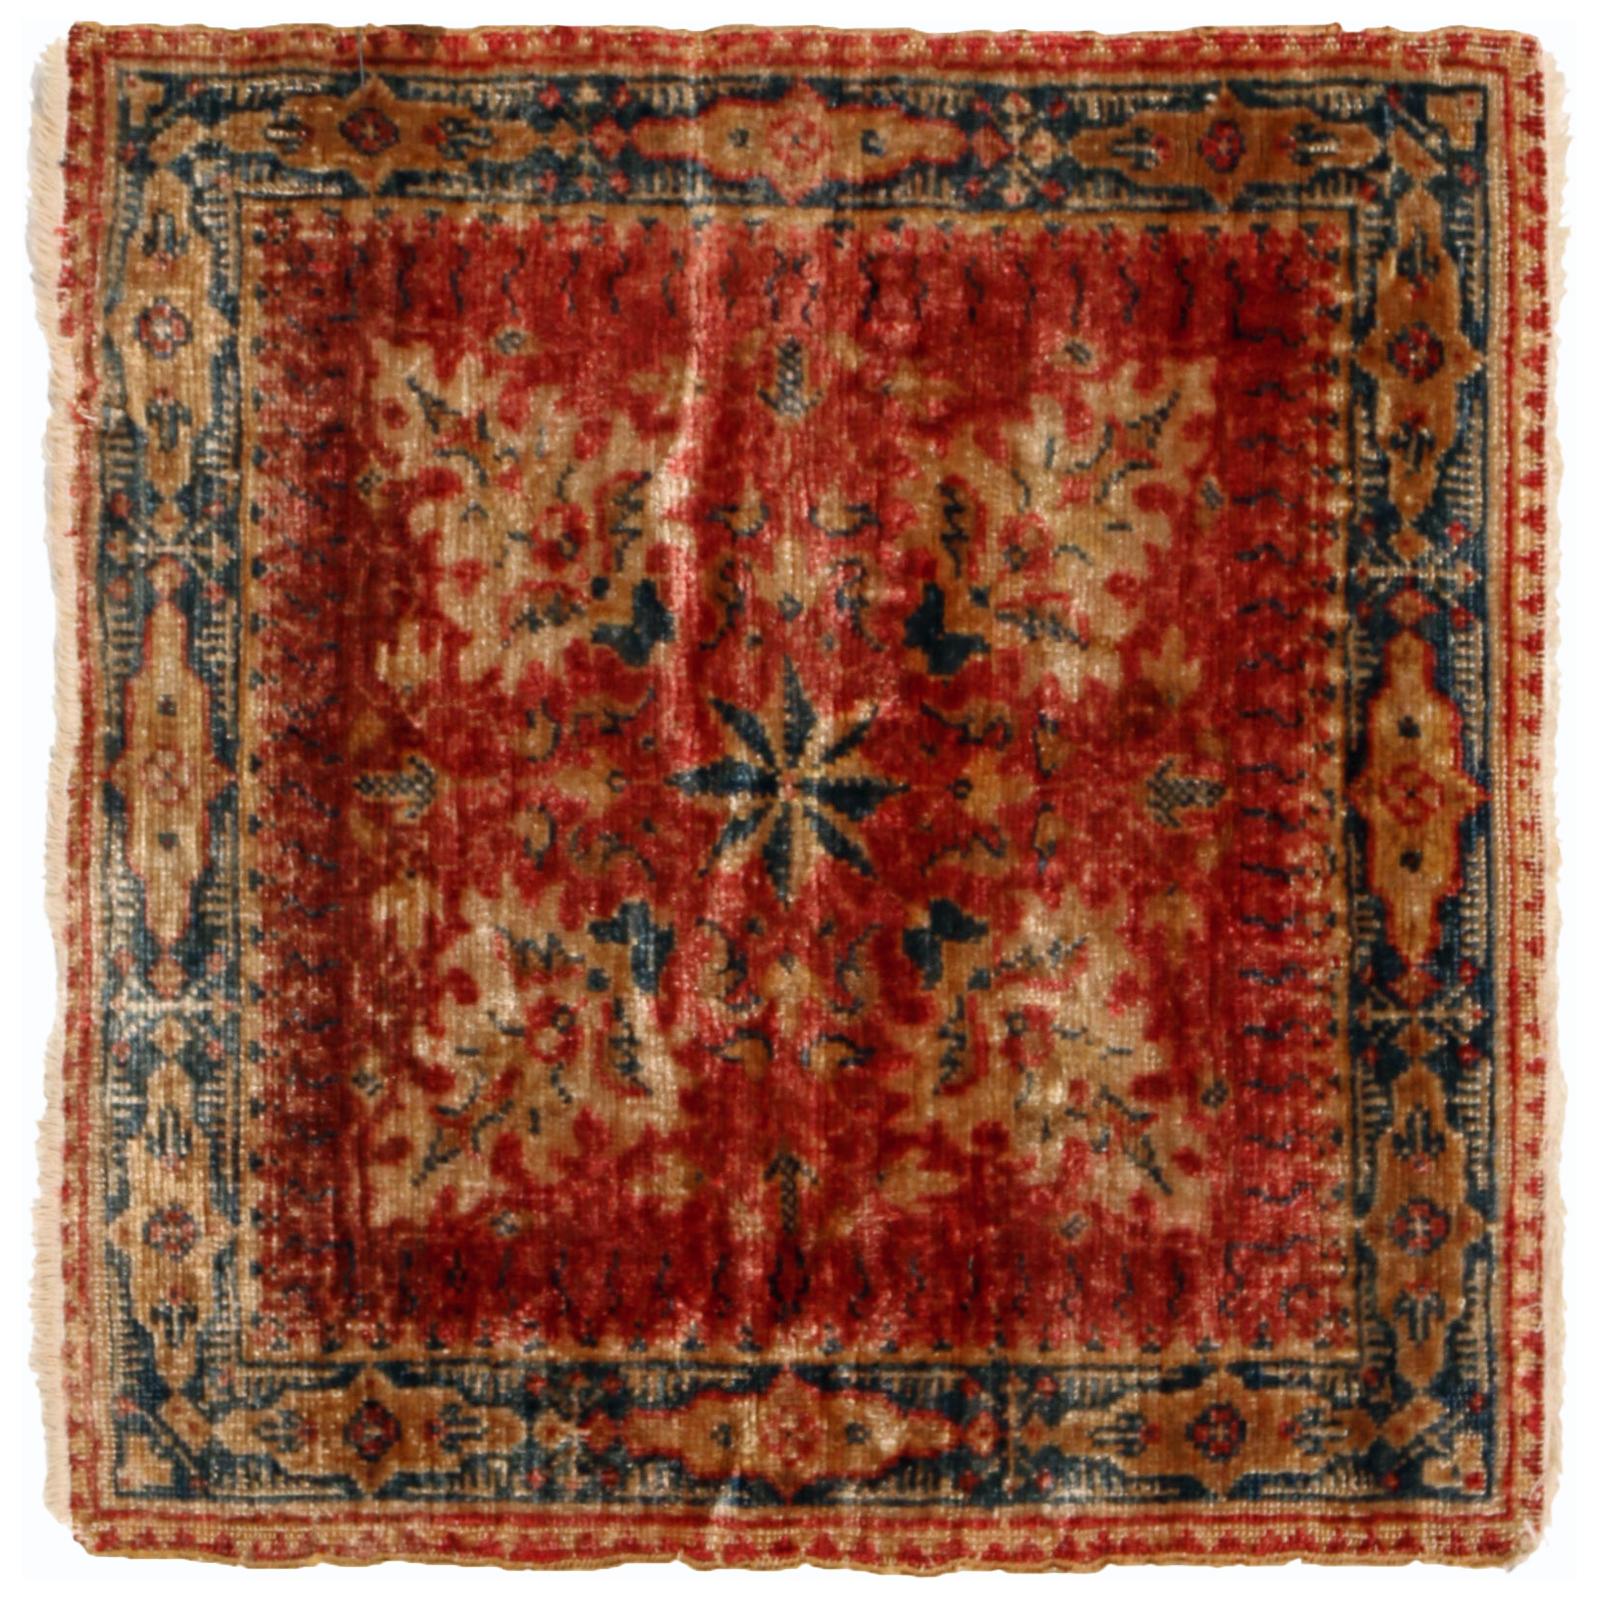 Antique Hereke Red Beige Silk Square Rug with Floral Motifs